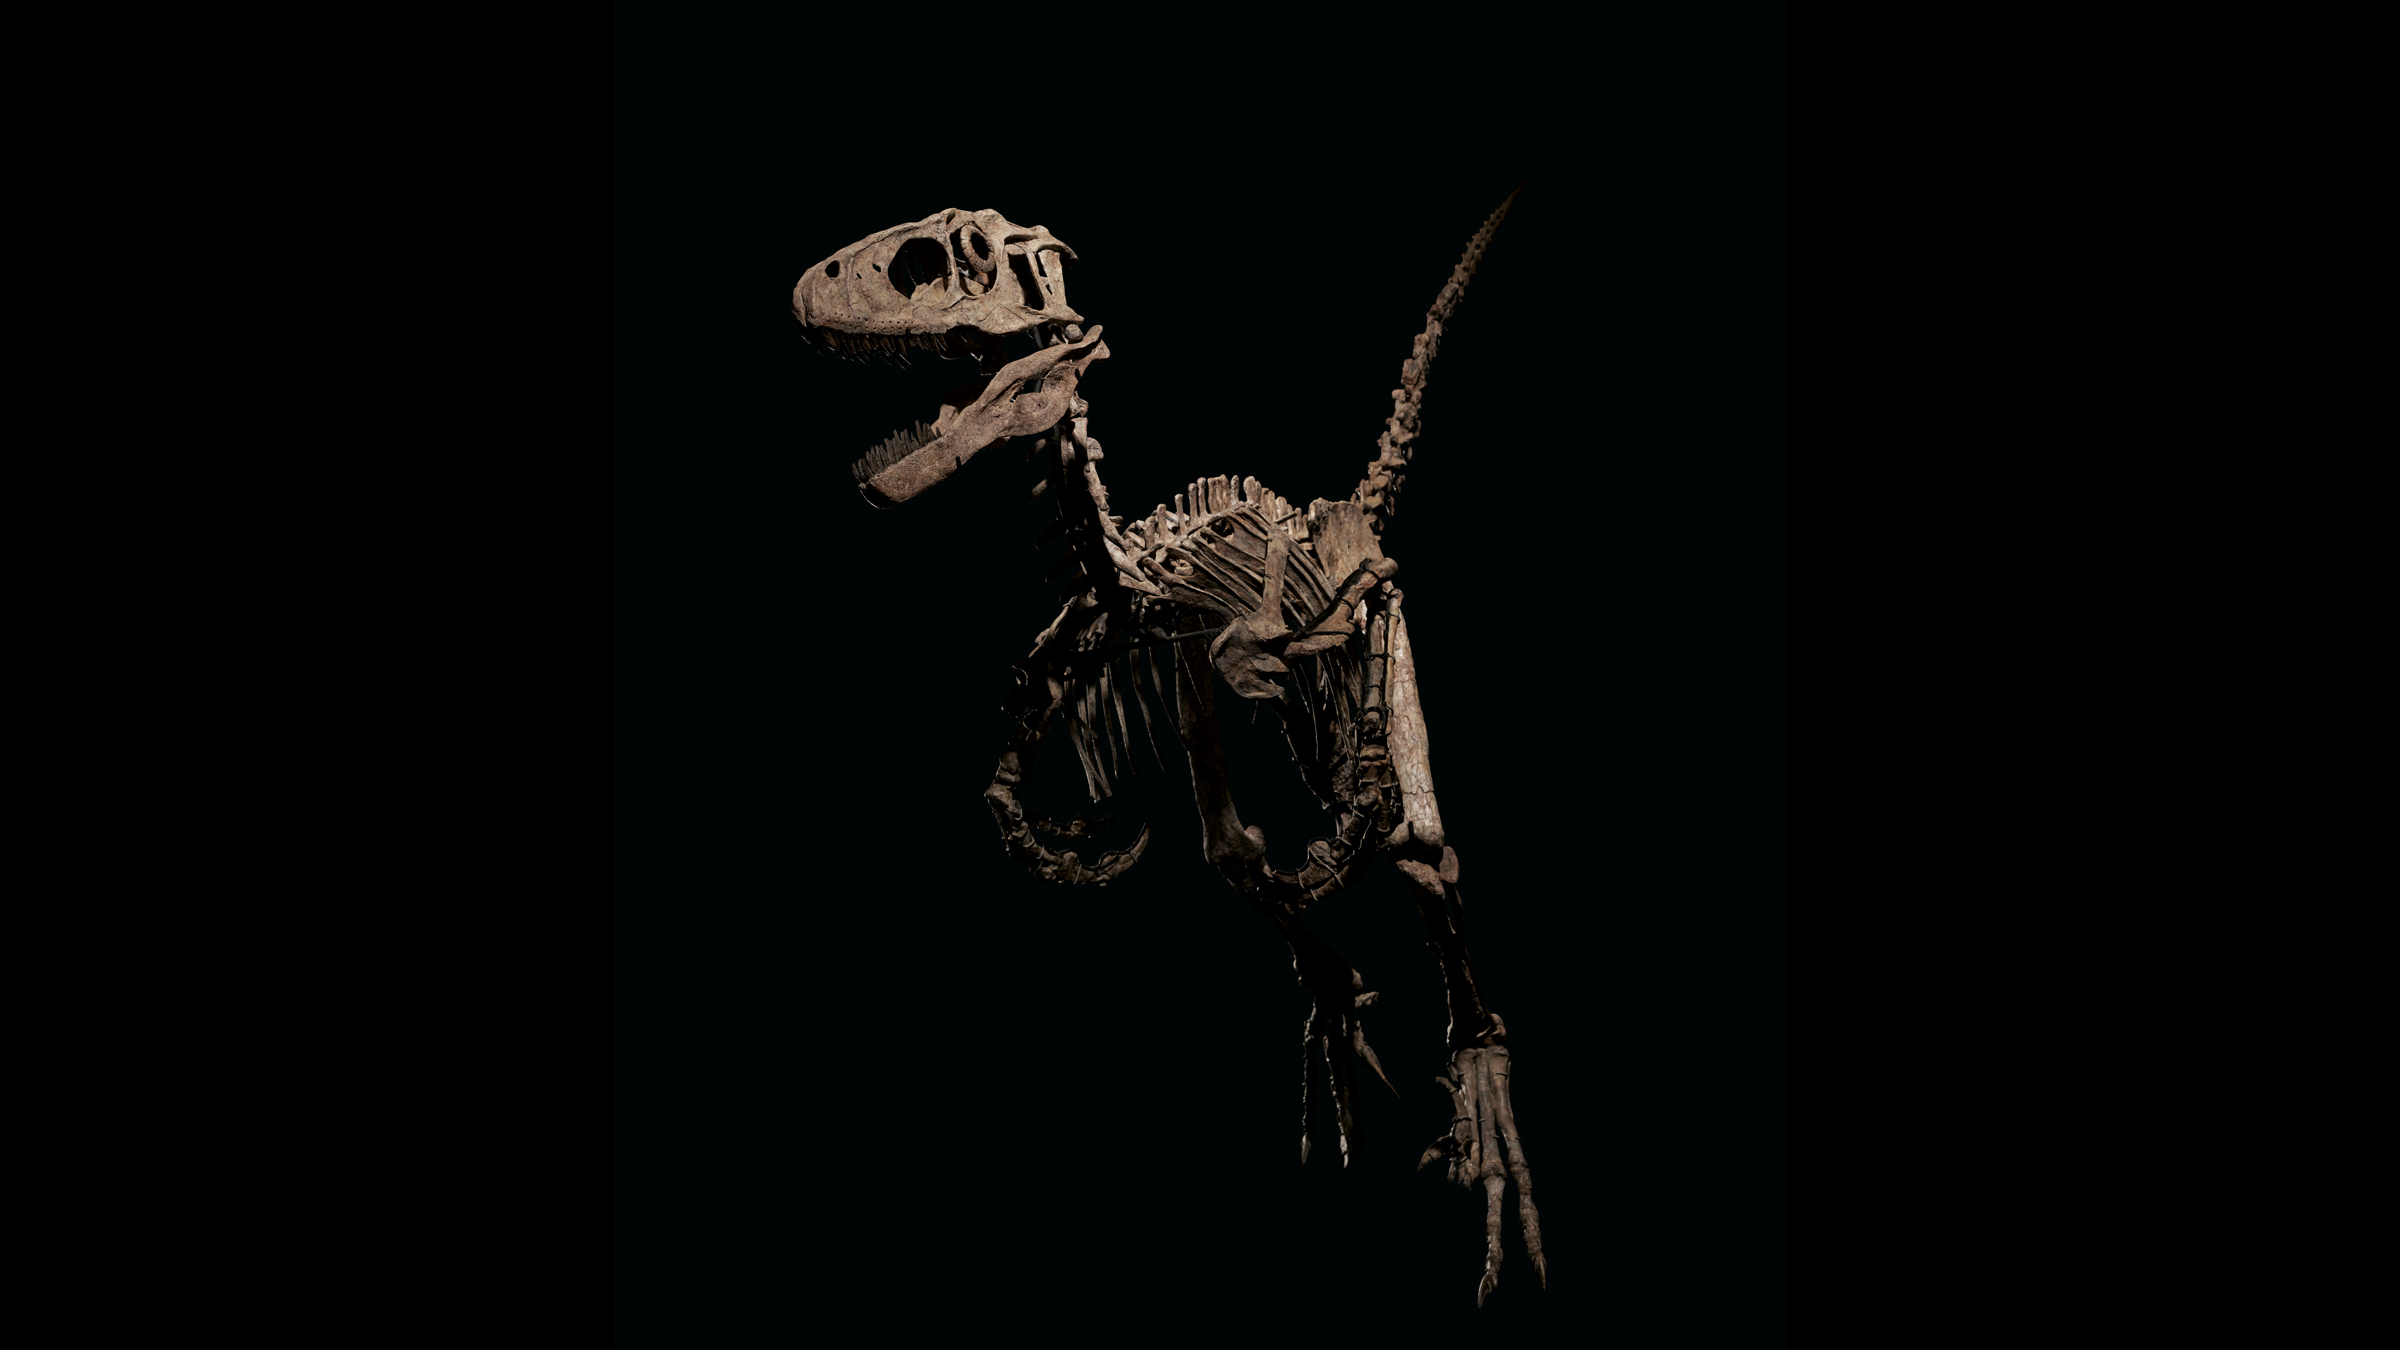 A photo of a complete Deinonychus skeleton.  Deinonychus lived in North America during the Cretaceous period.